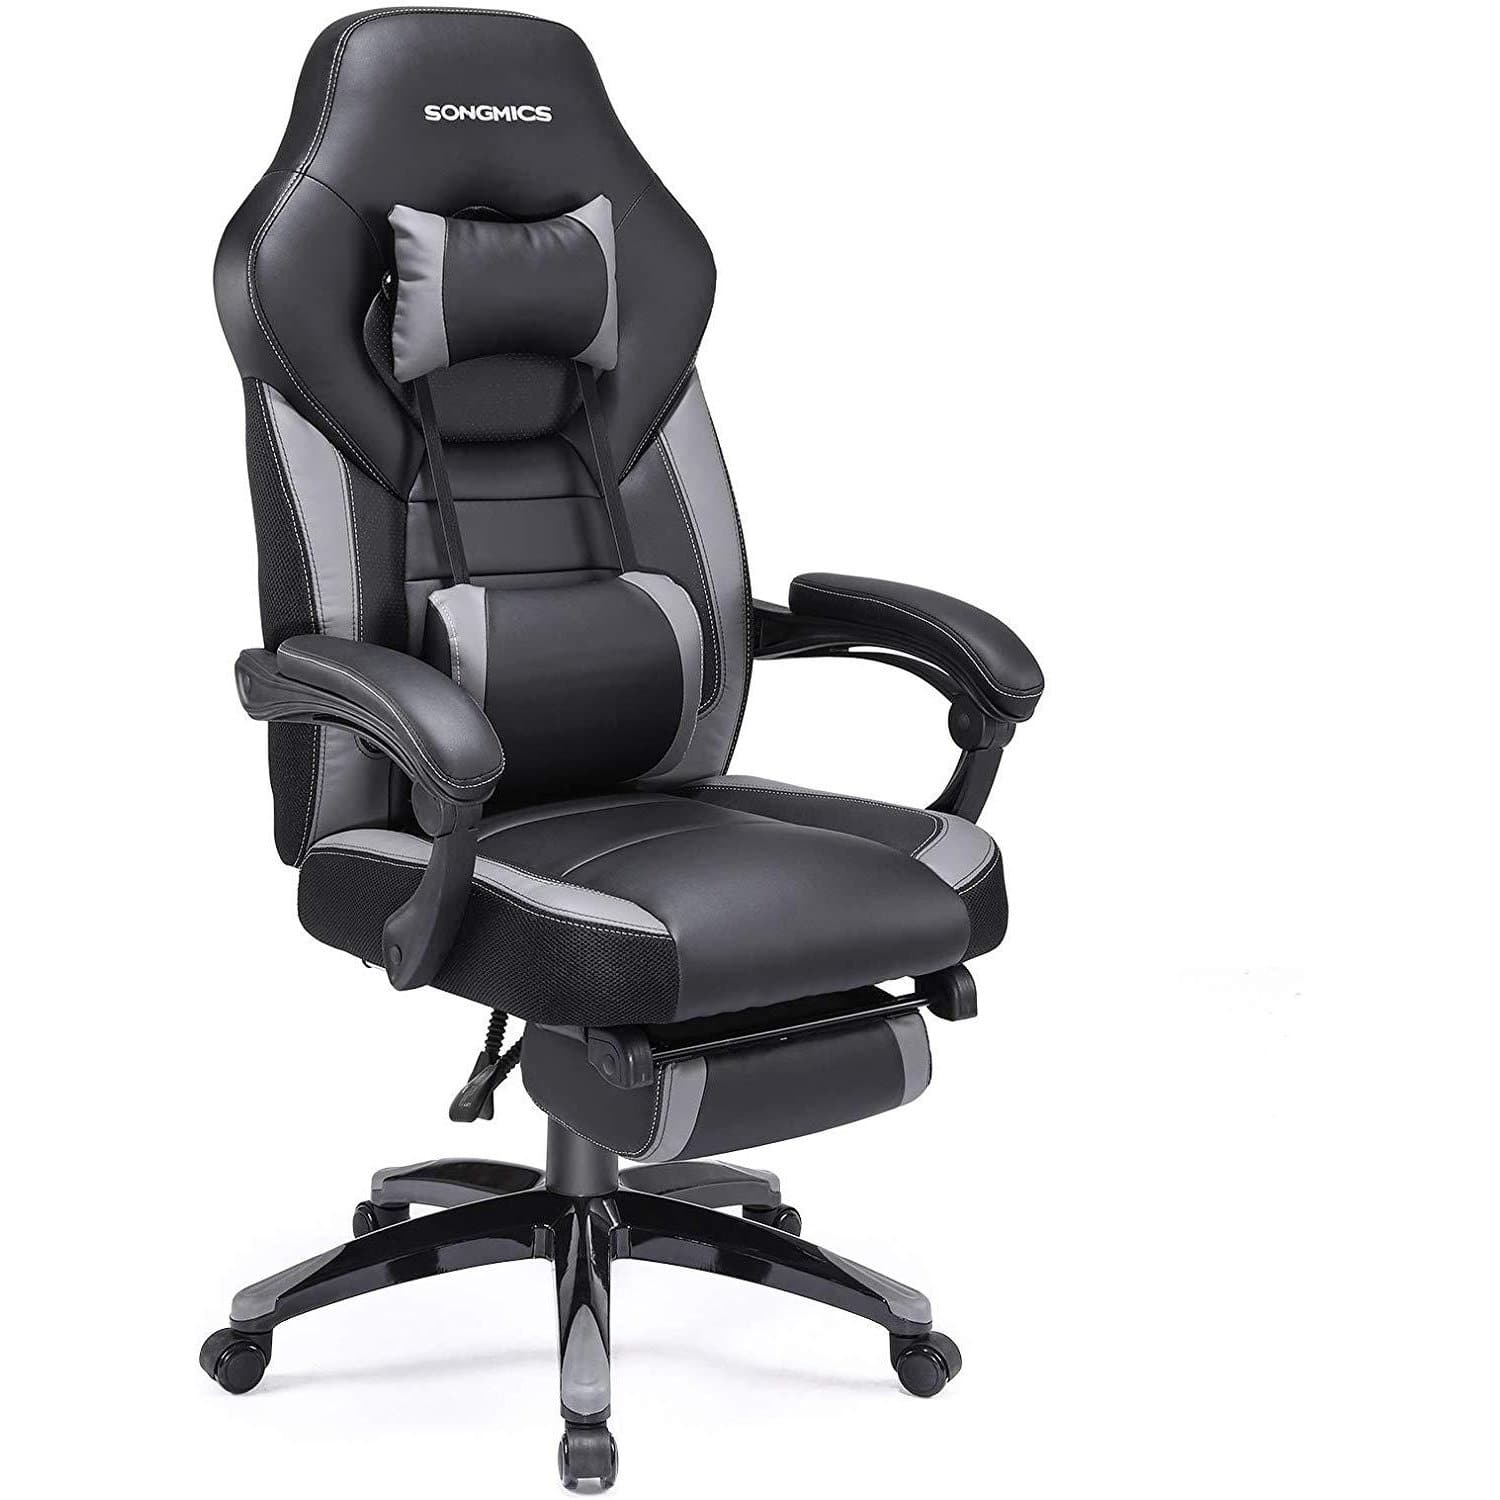 Nancy's Gaming Chair - Office Chair with Footrest - Black-gray